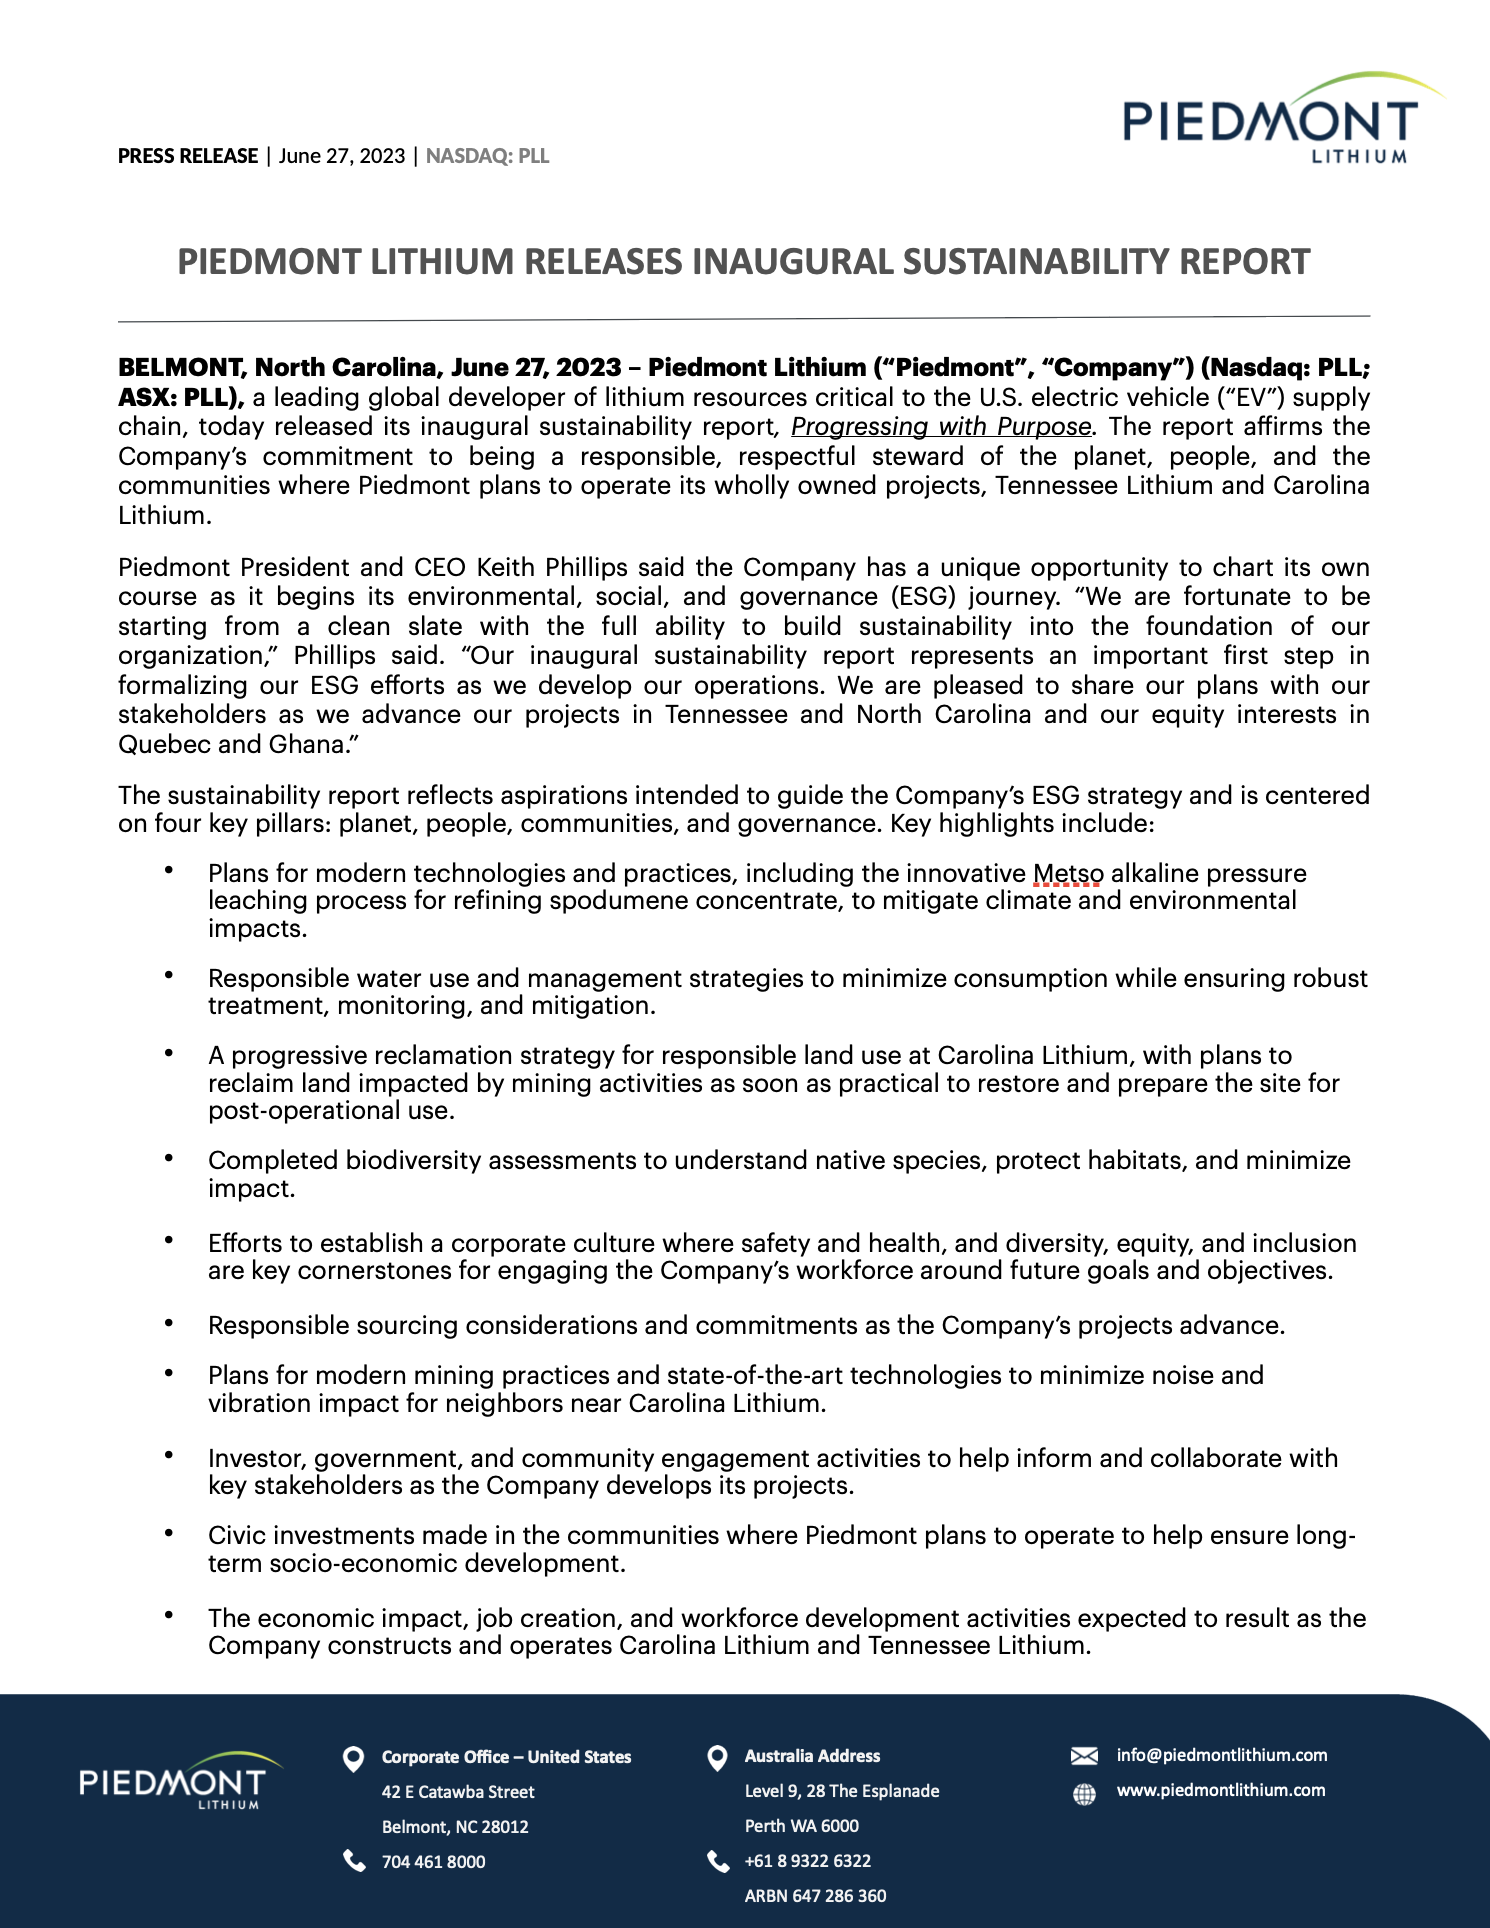 Piedmont Lithium Releases Inaugural Sustainability Report